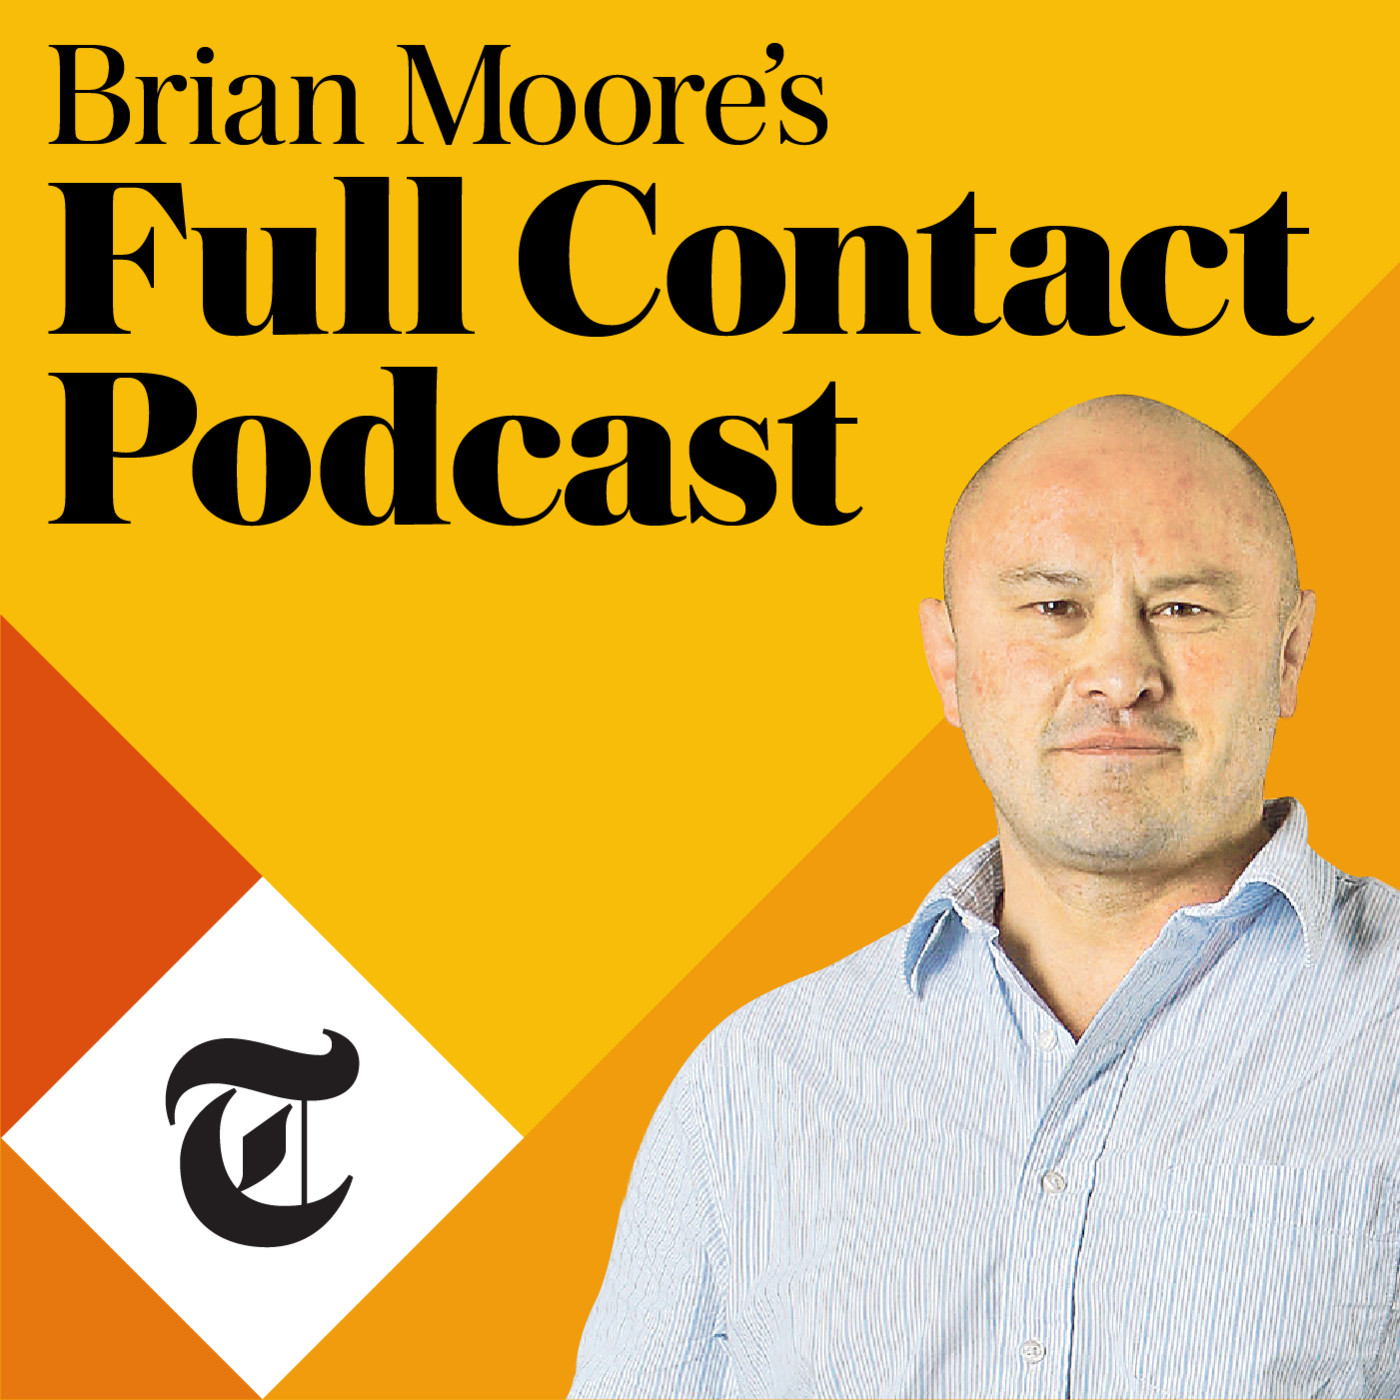 Brian Moore: There is not enough money and English talent to populate even one professional league